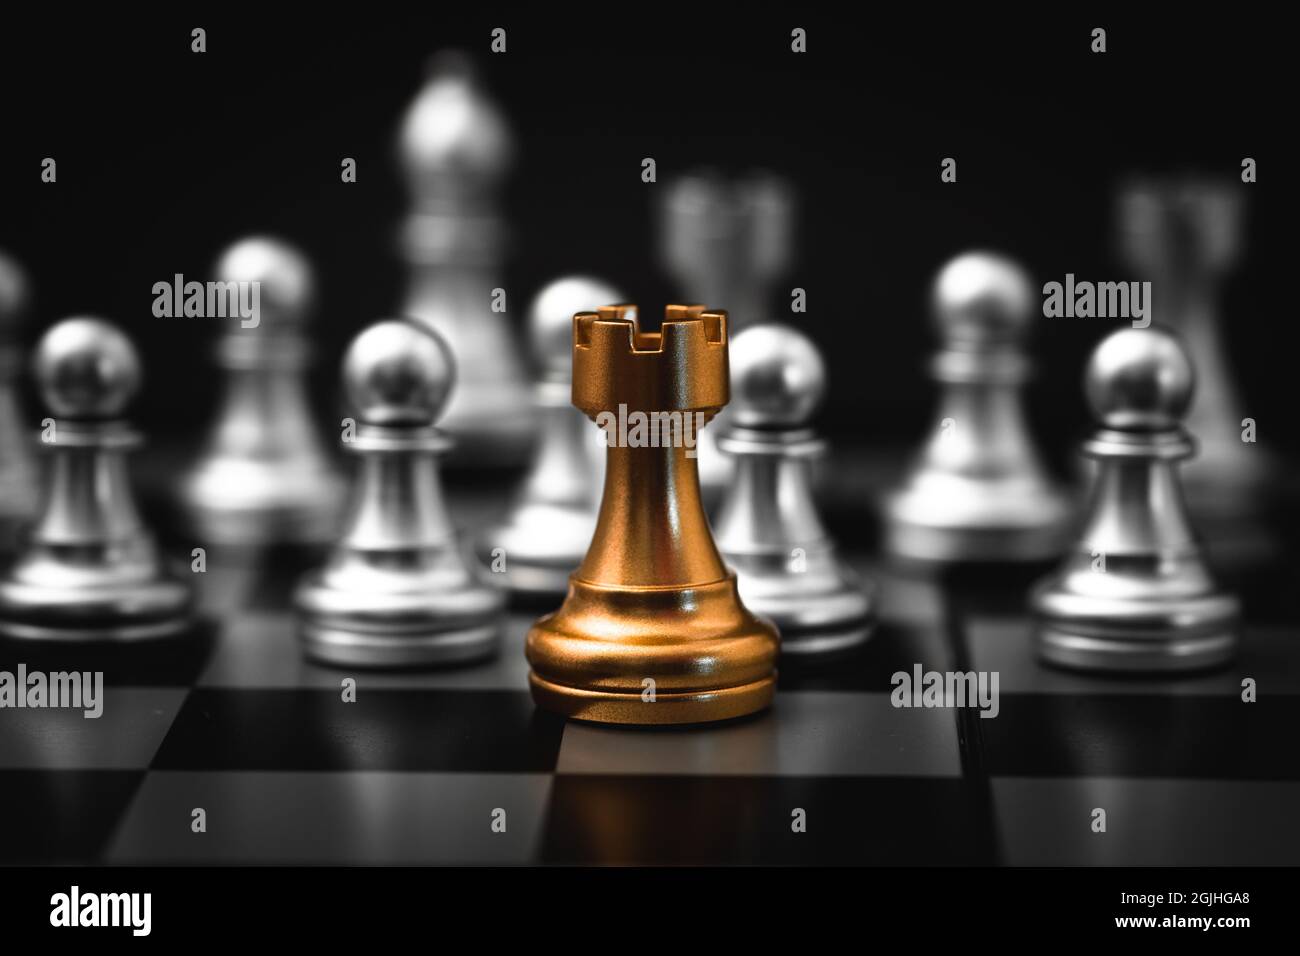 Gold Rook or Castle Tower Chess piece closeup on chess board game. Elite Company leader concept. Stock Photo